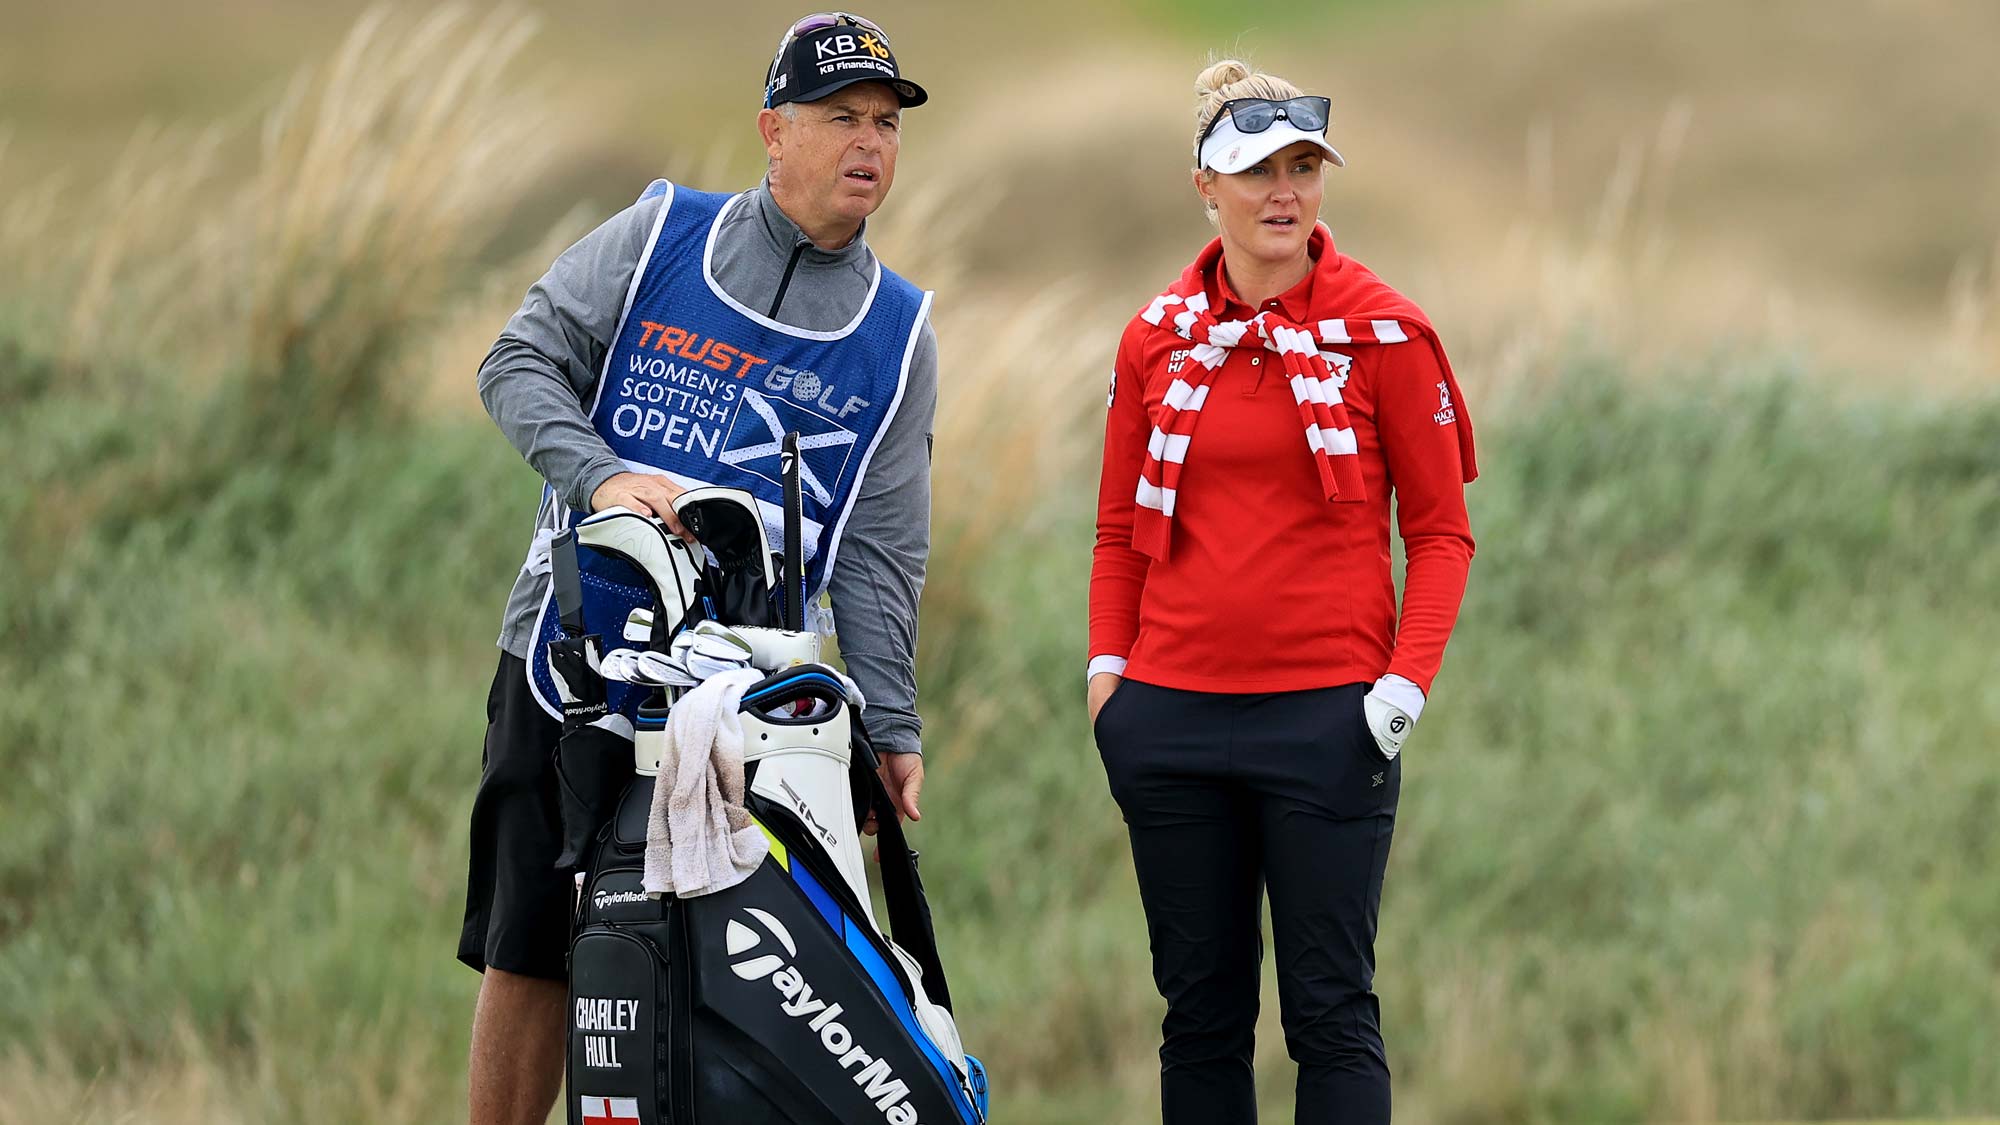 Charley Hull of England plays her second shot on the 10th hole during the final round of the Trust Golf Women's Scottish Open